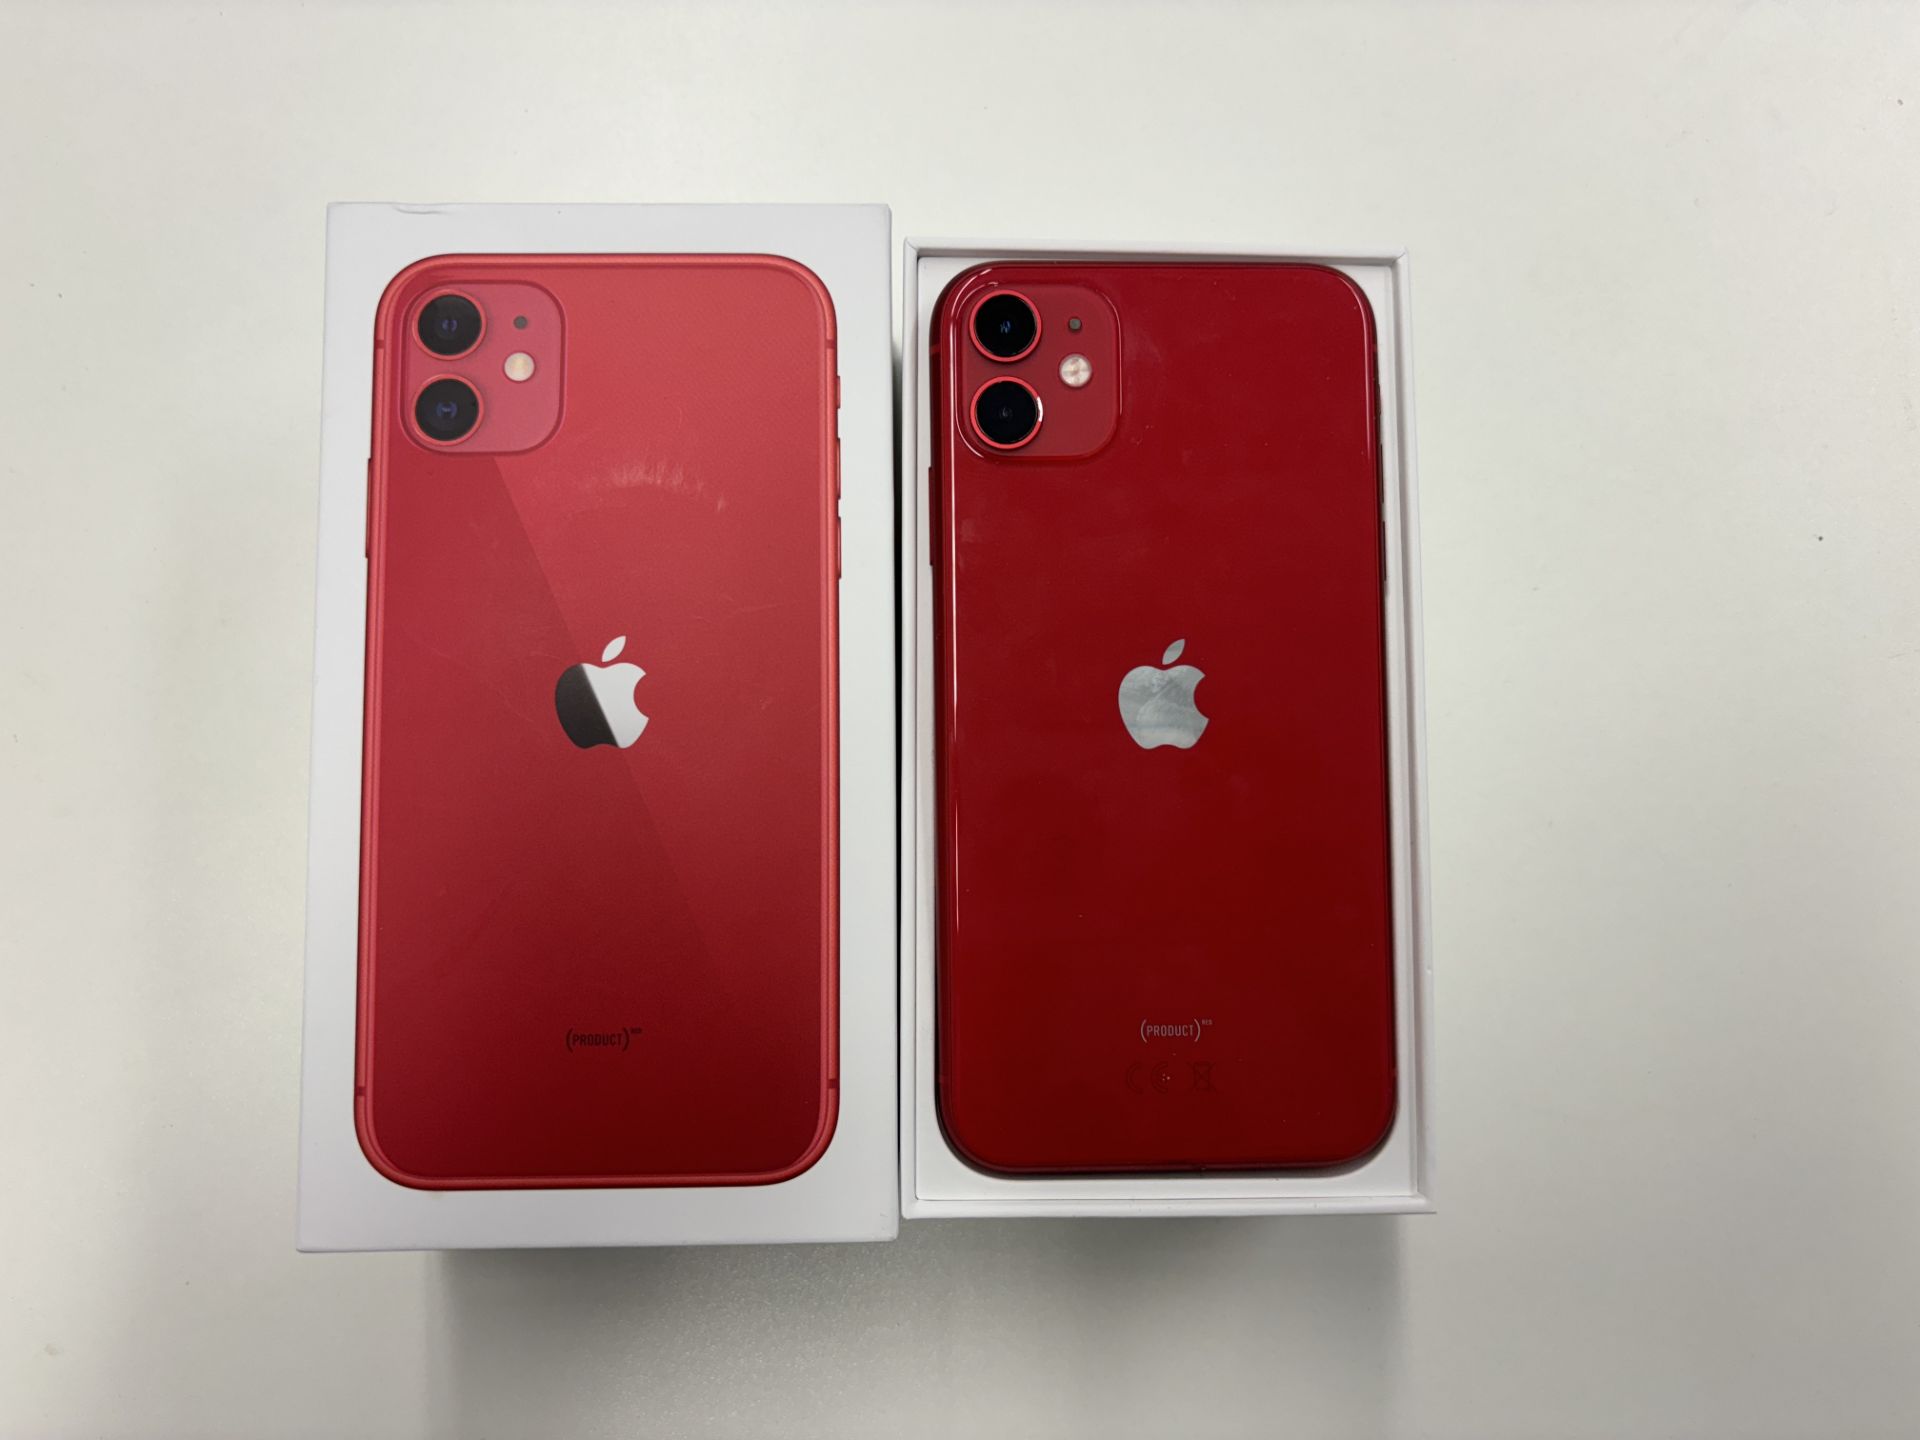 Apple iPhone 11, 128GB, red, model A2221, comes with original box with unused headphones, charger - Image 2 of 8